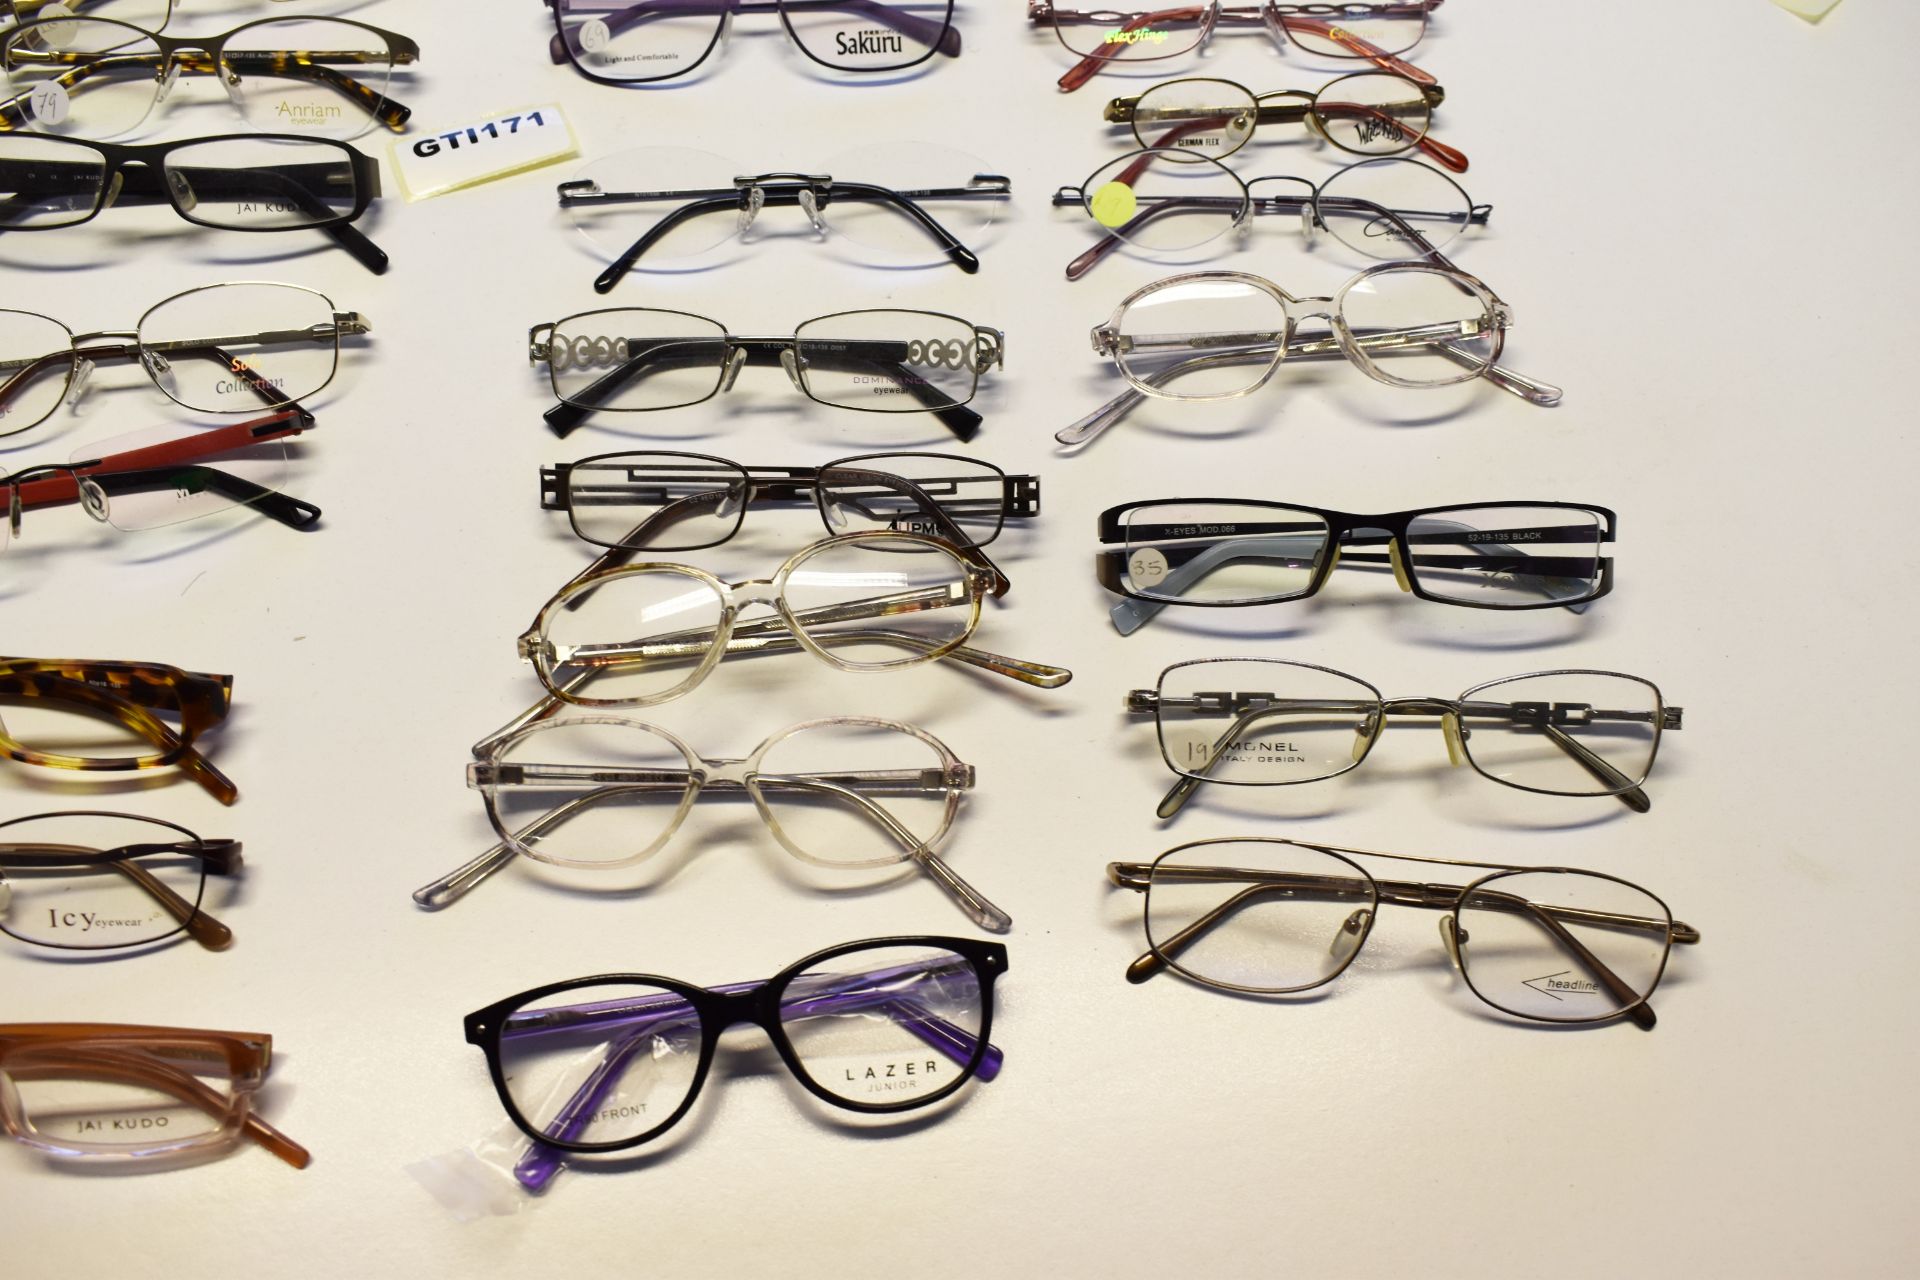 50 x Assorted Pairs of Spectacle Eye Glasses - New and Unused Stock - Various Designs and Brands - Image 9 of 19